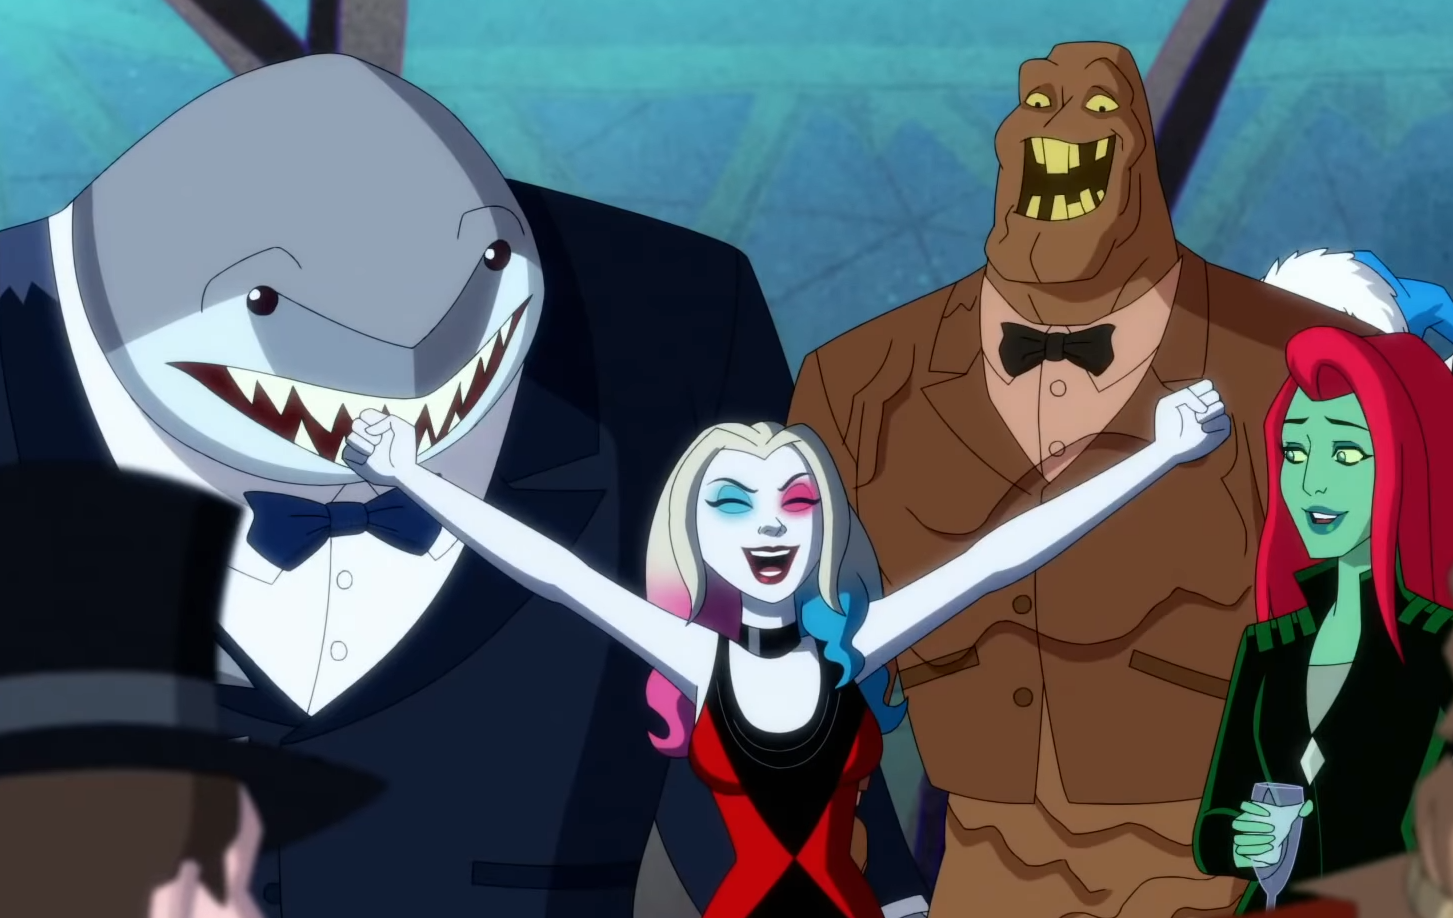 HBO Max Renews Adult-Animated Series “Harley Quinn” For A Fourth Season